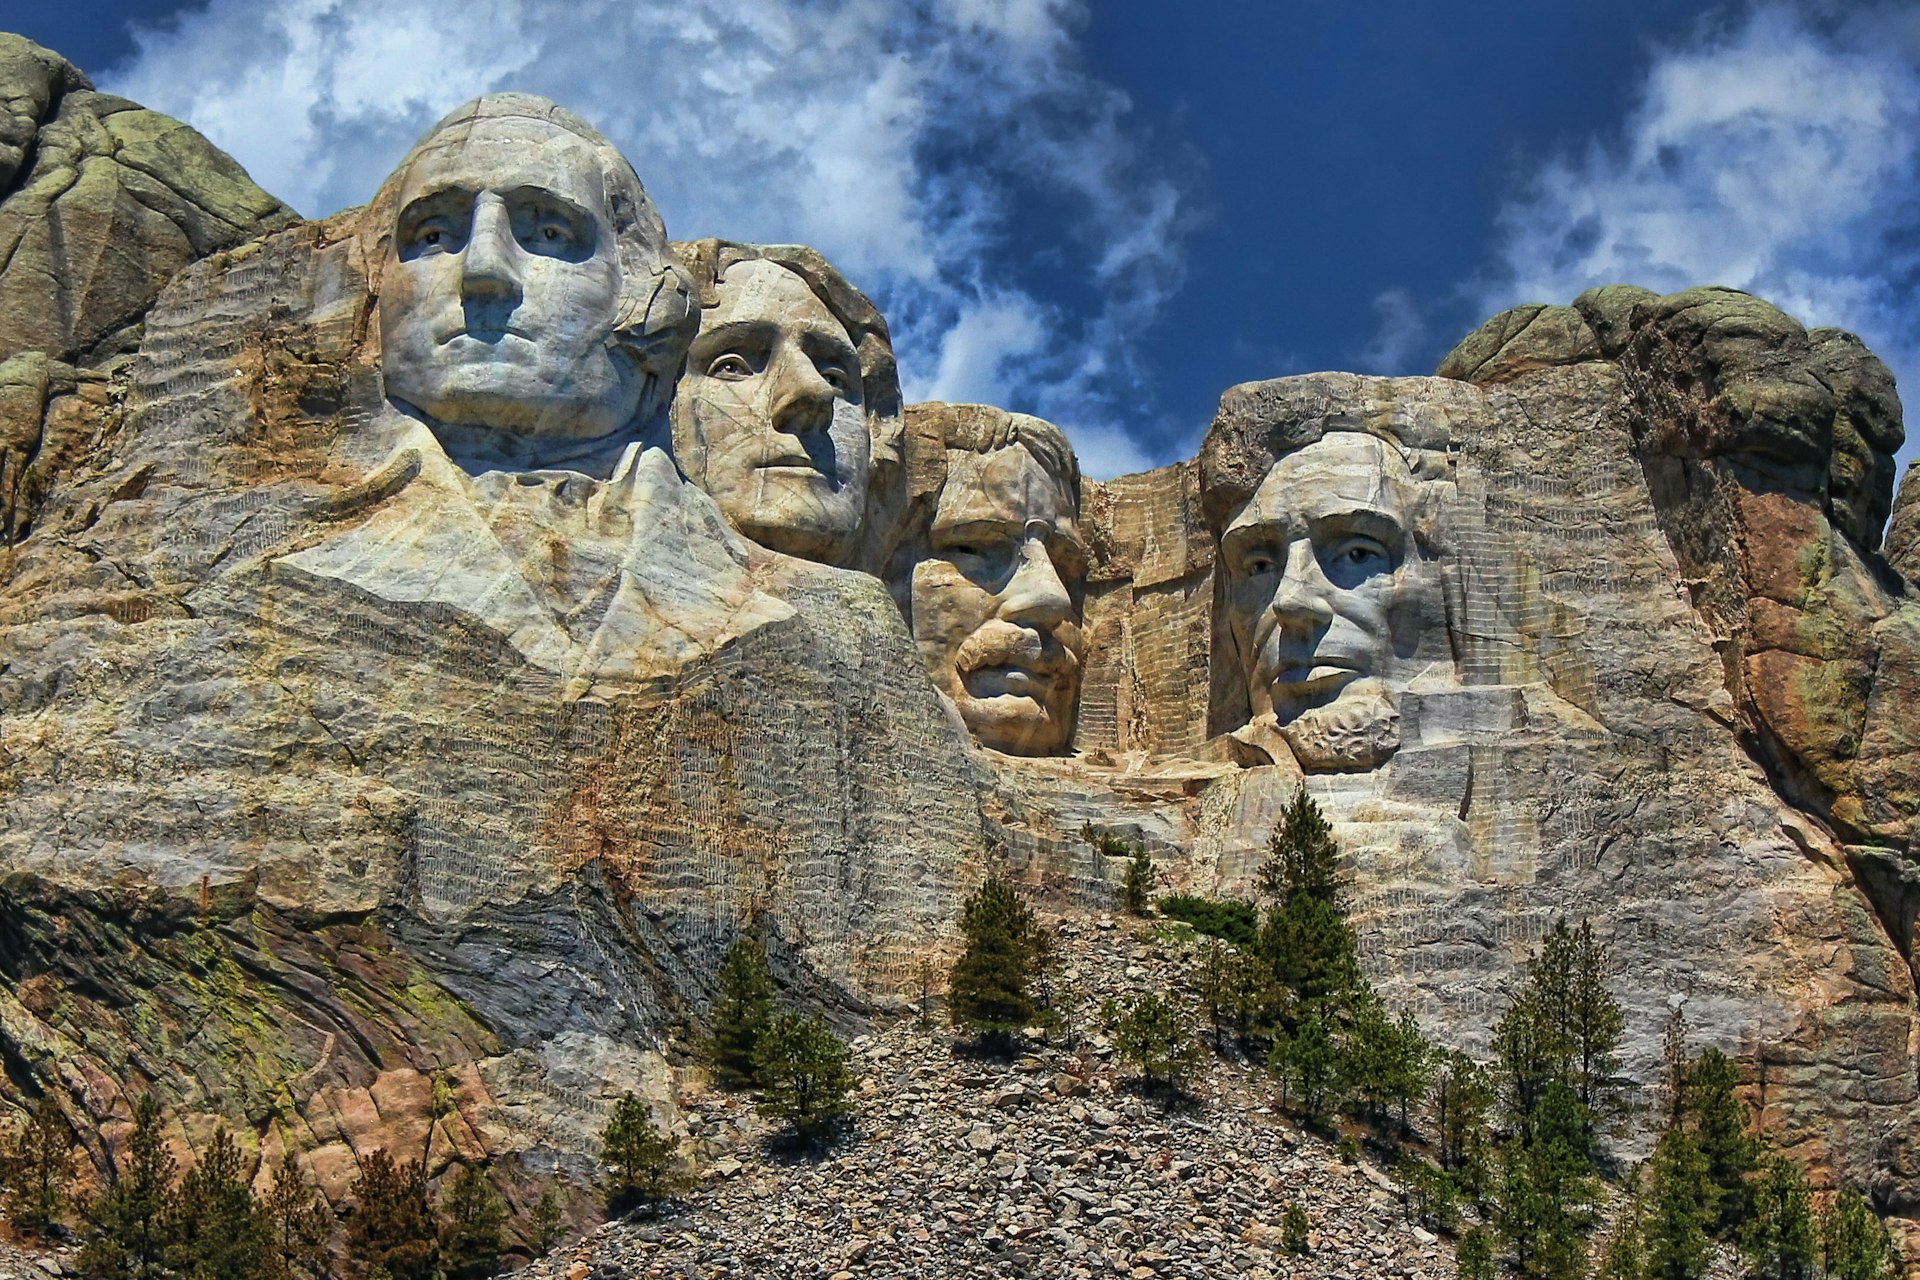 It took 14 years to carve Washington, Jefferson, Roosevelt and Lincoln into stone. Image by biglannie / Budget Travel